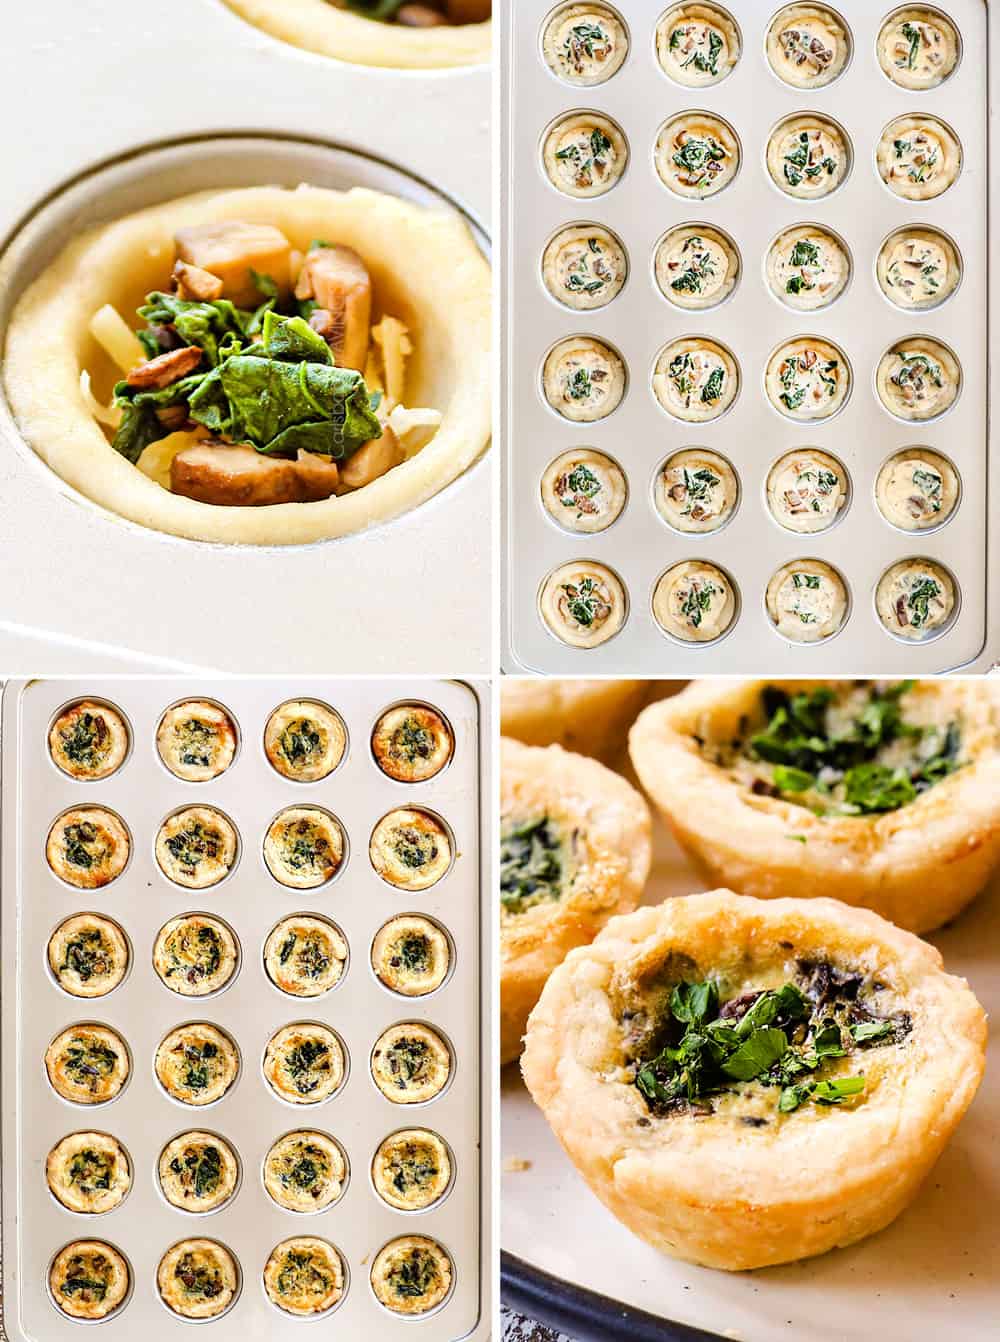 a collage showing how to make mini quiche by adding cheese, mushrooms and spinach to quiche pastry, adding custard and baking